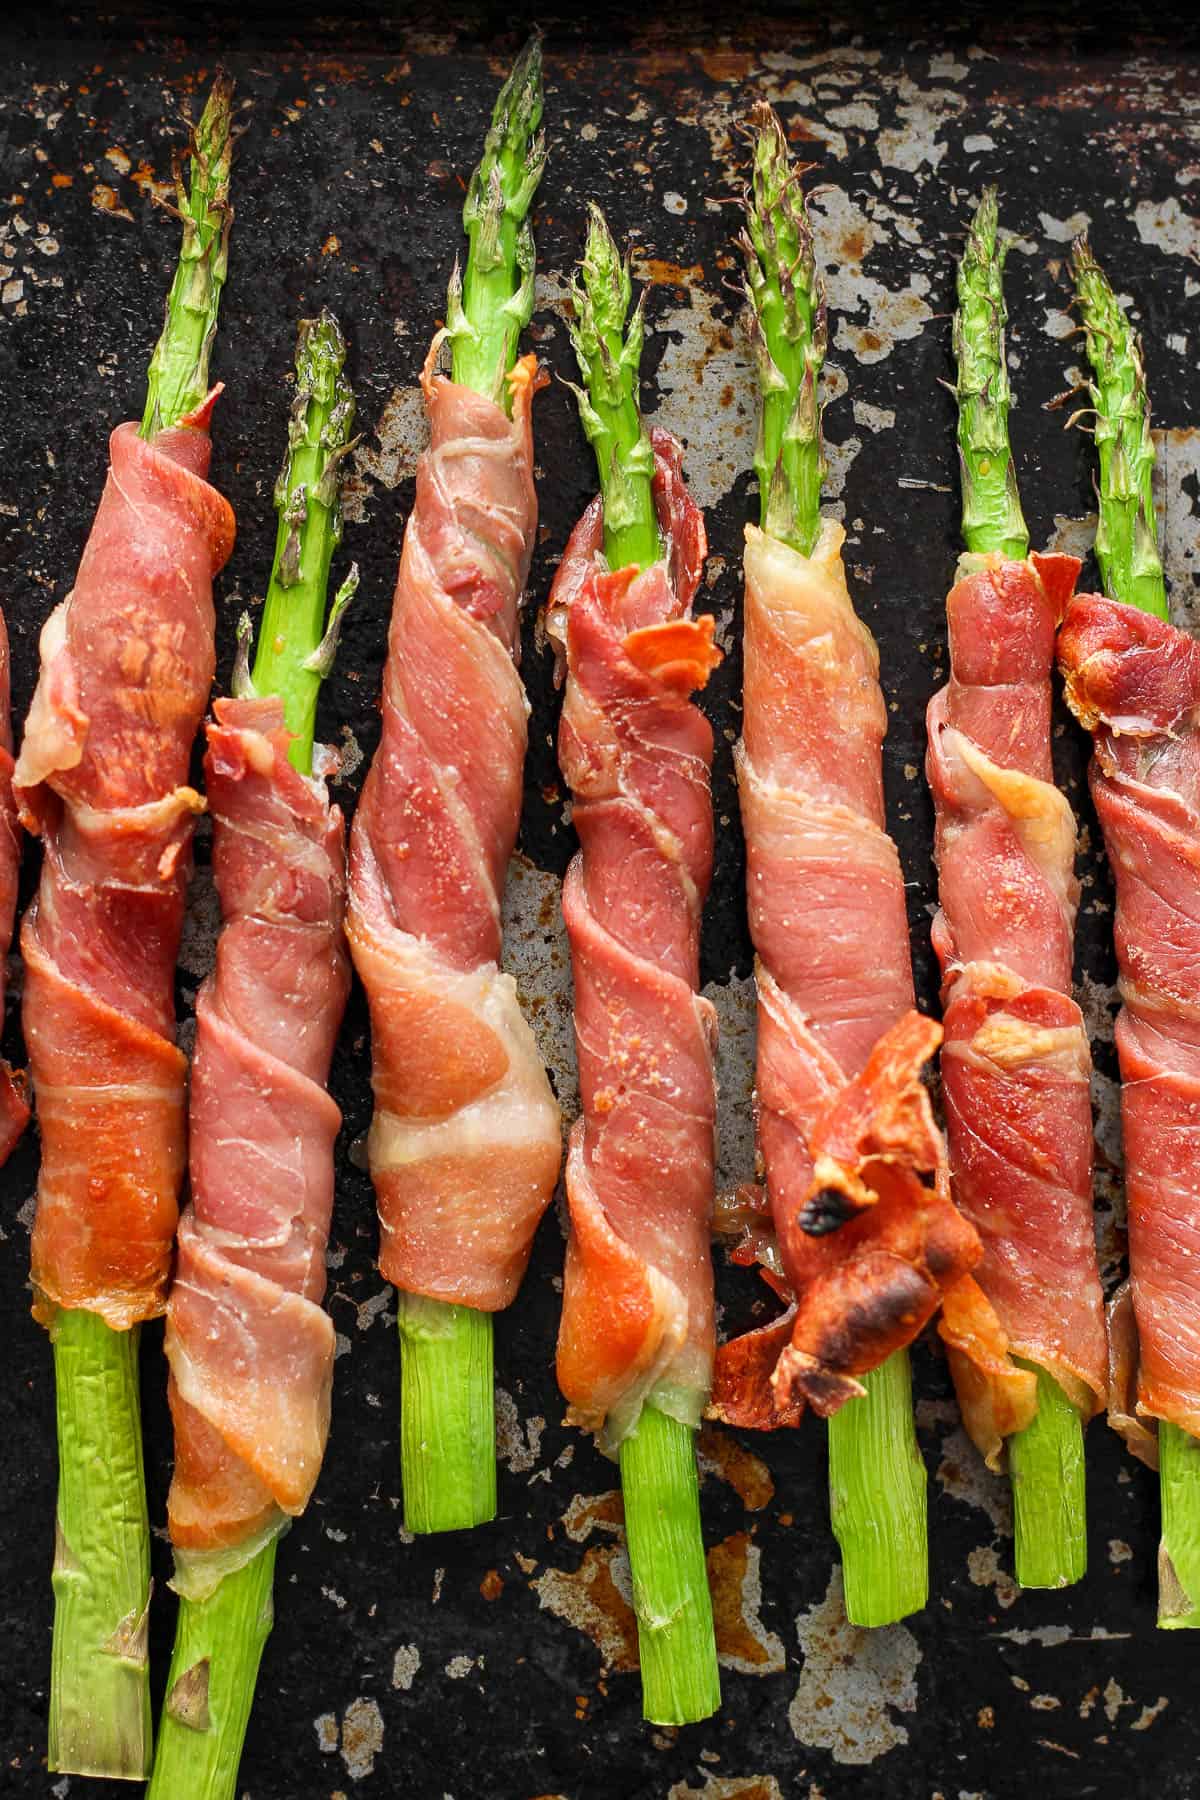 A bunch of prosciutto wrapped asparagus after cooking.